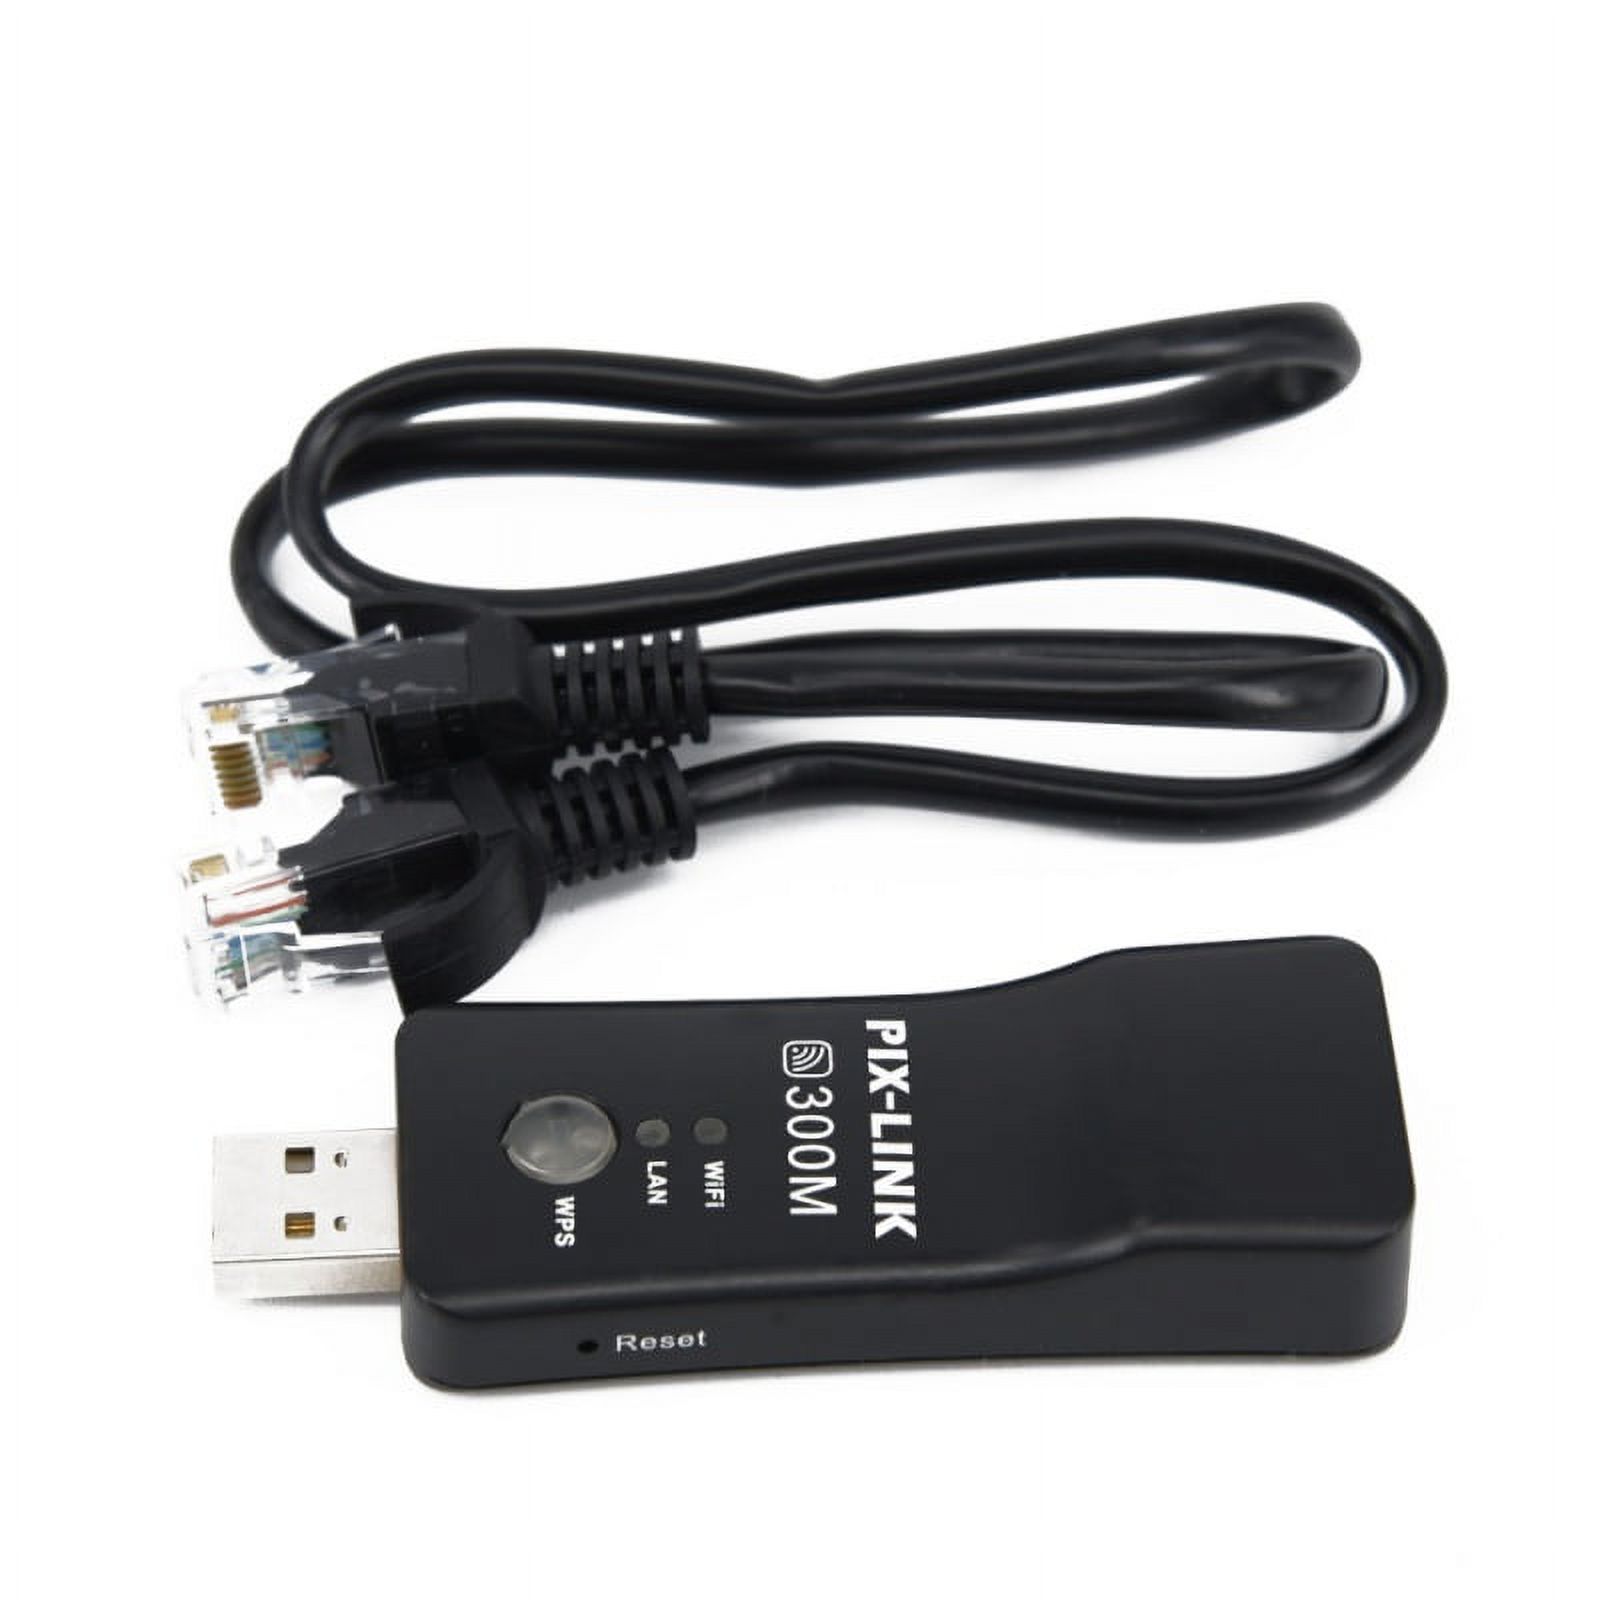 USB Wireless LAN Adapter WiFi Dongle for Smart TV Blu-Ray Player BDP-BX37 - image 1 of 8